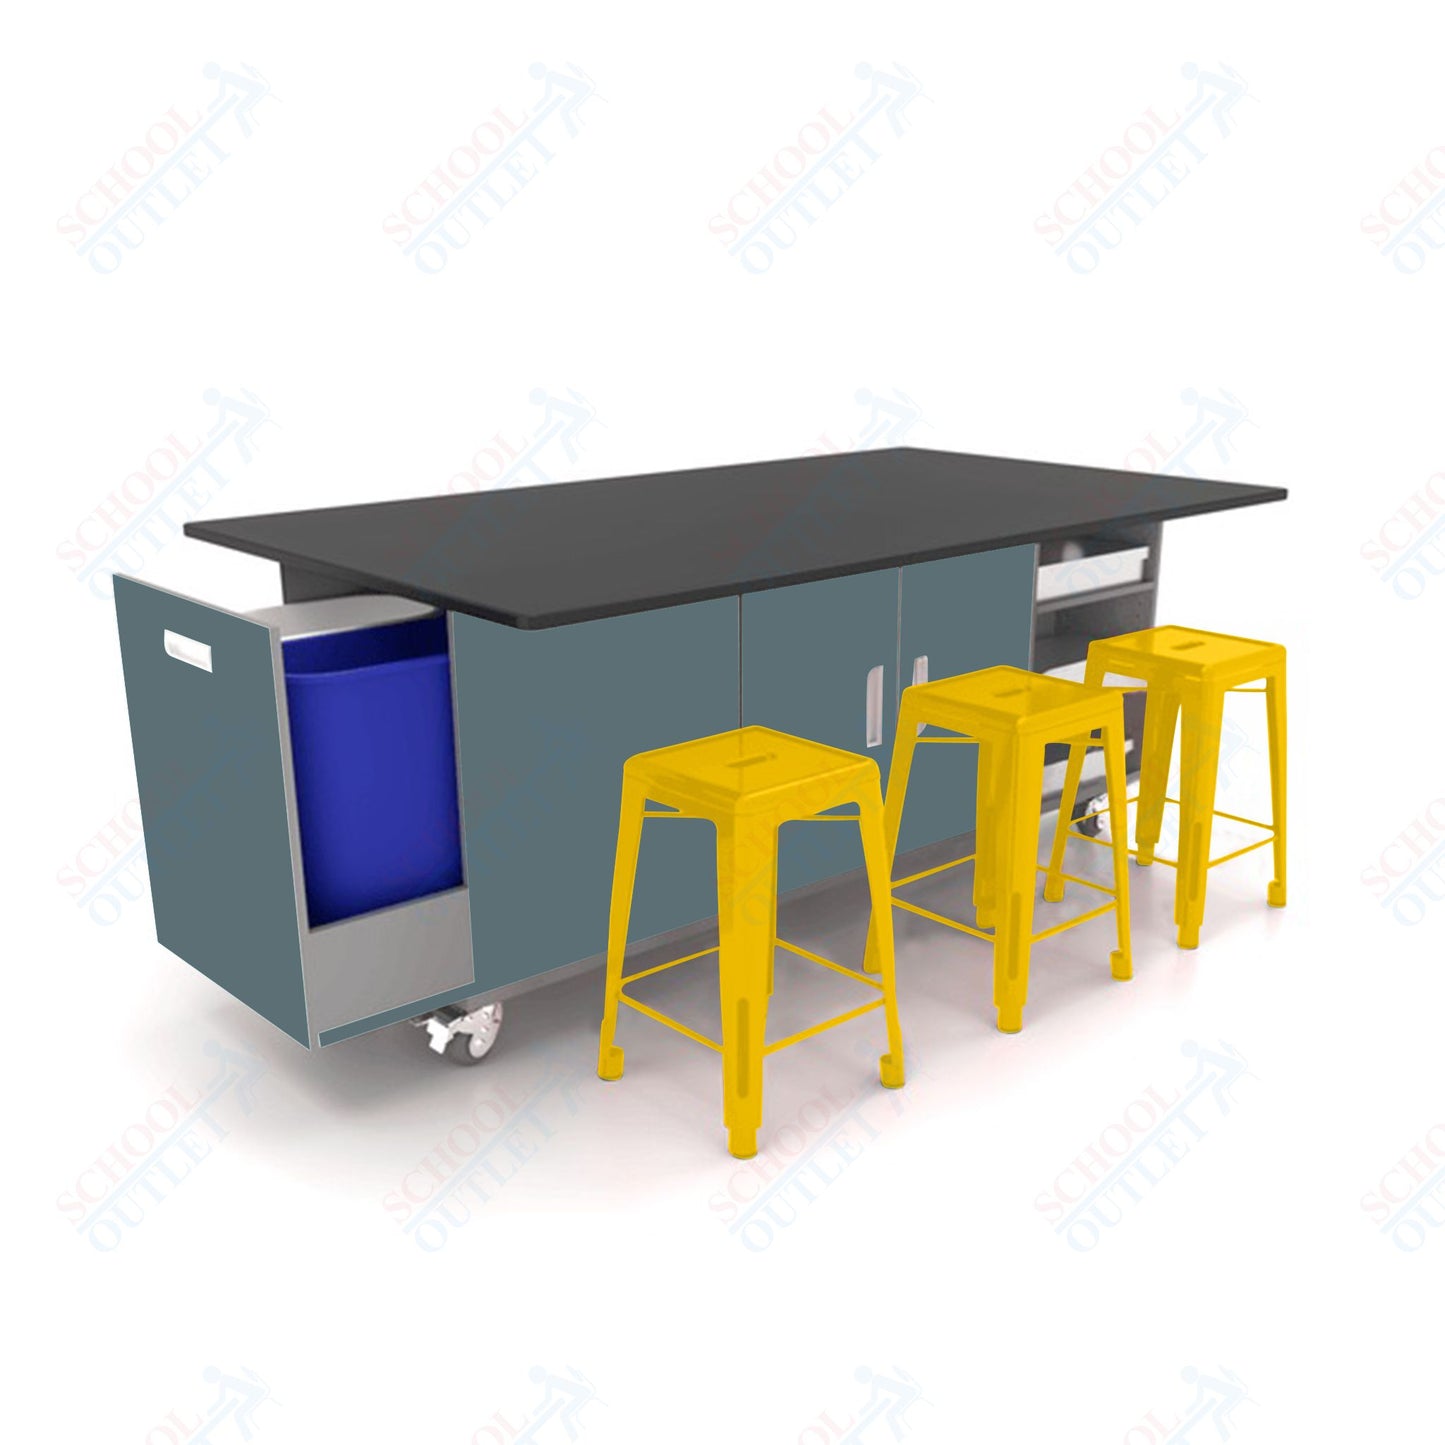 CEF ED Original Table 42"H Chemical Resistant Top, Laminate Base with  6 Stools, Storage Bins, Trash Bins, and Electrical Outlets Included.